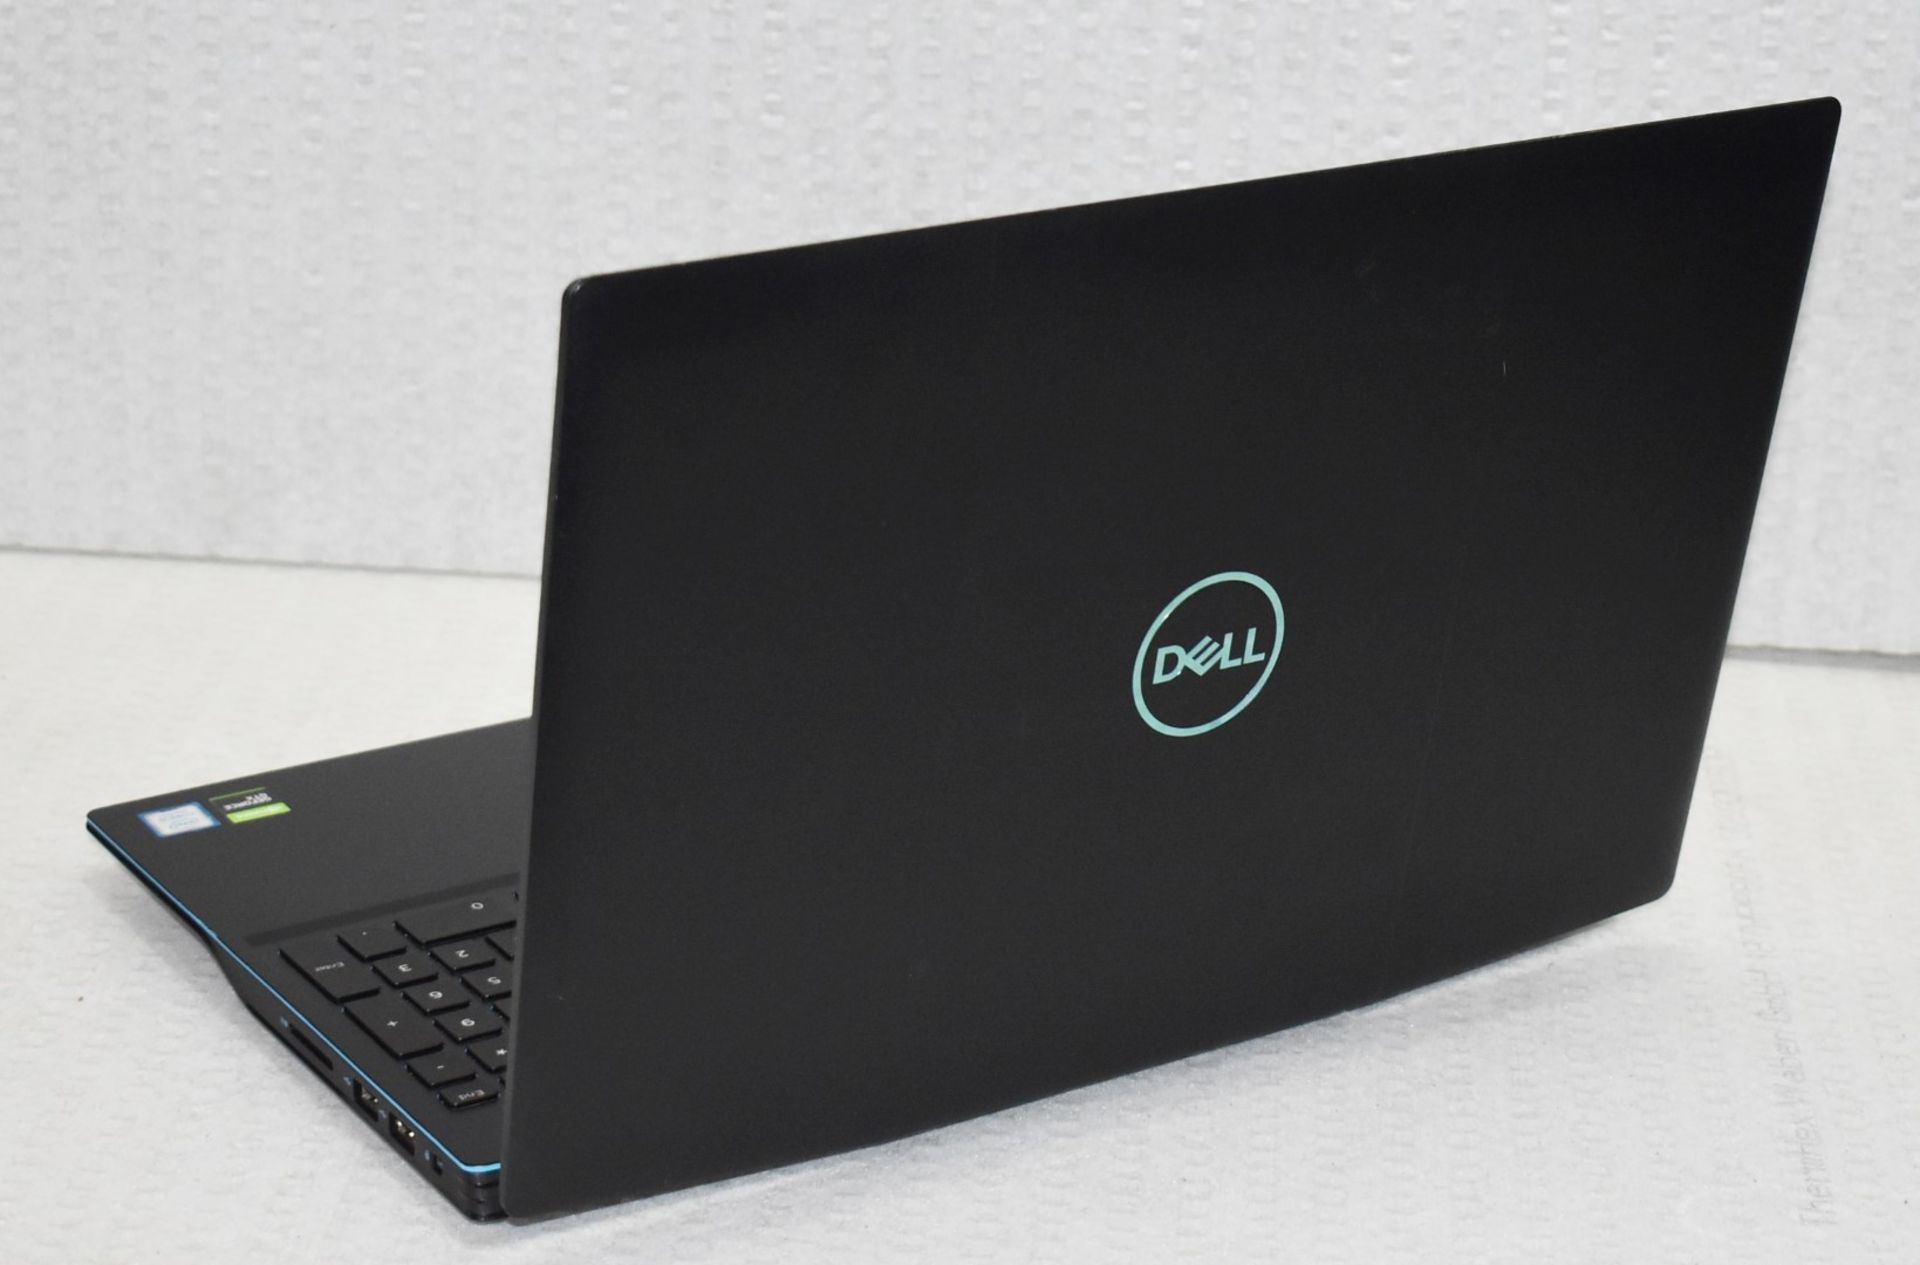 1 x Dell G3 15.6" Gaming Laptop Featuring FHD Screen, Intel I5-9300H Processor, 8gb DDR4 Ram, - Image 3 of 29